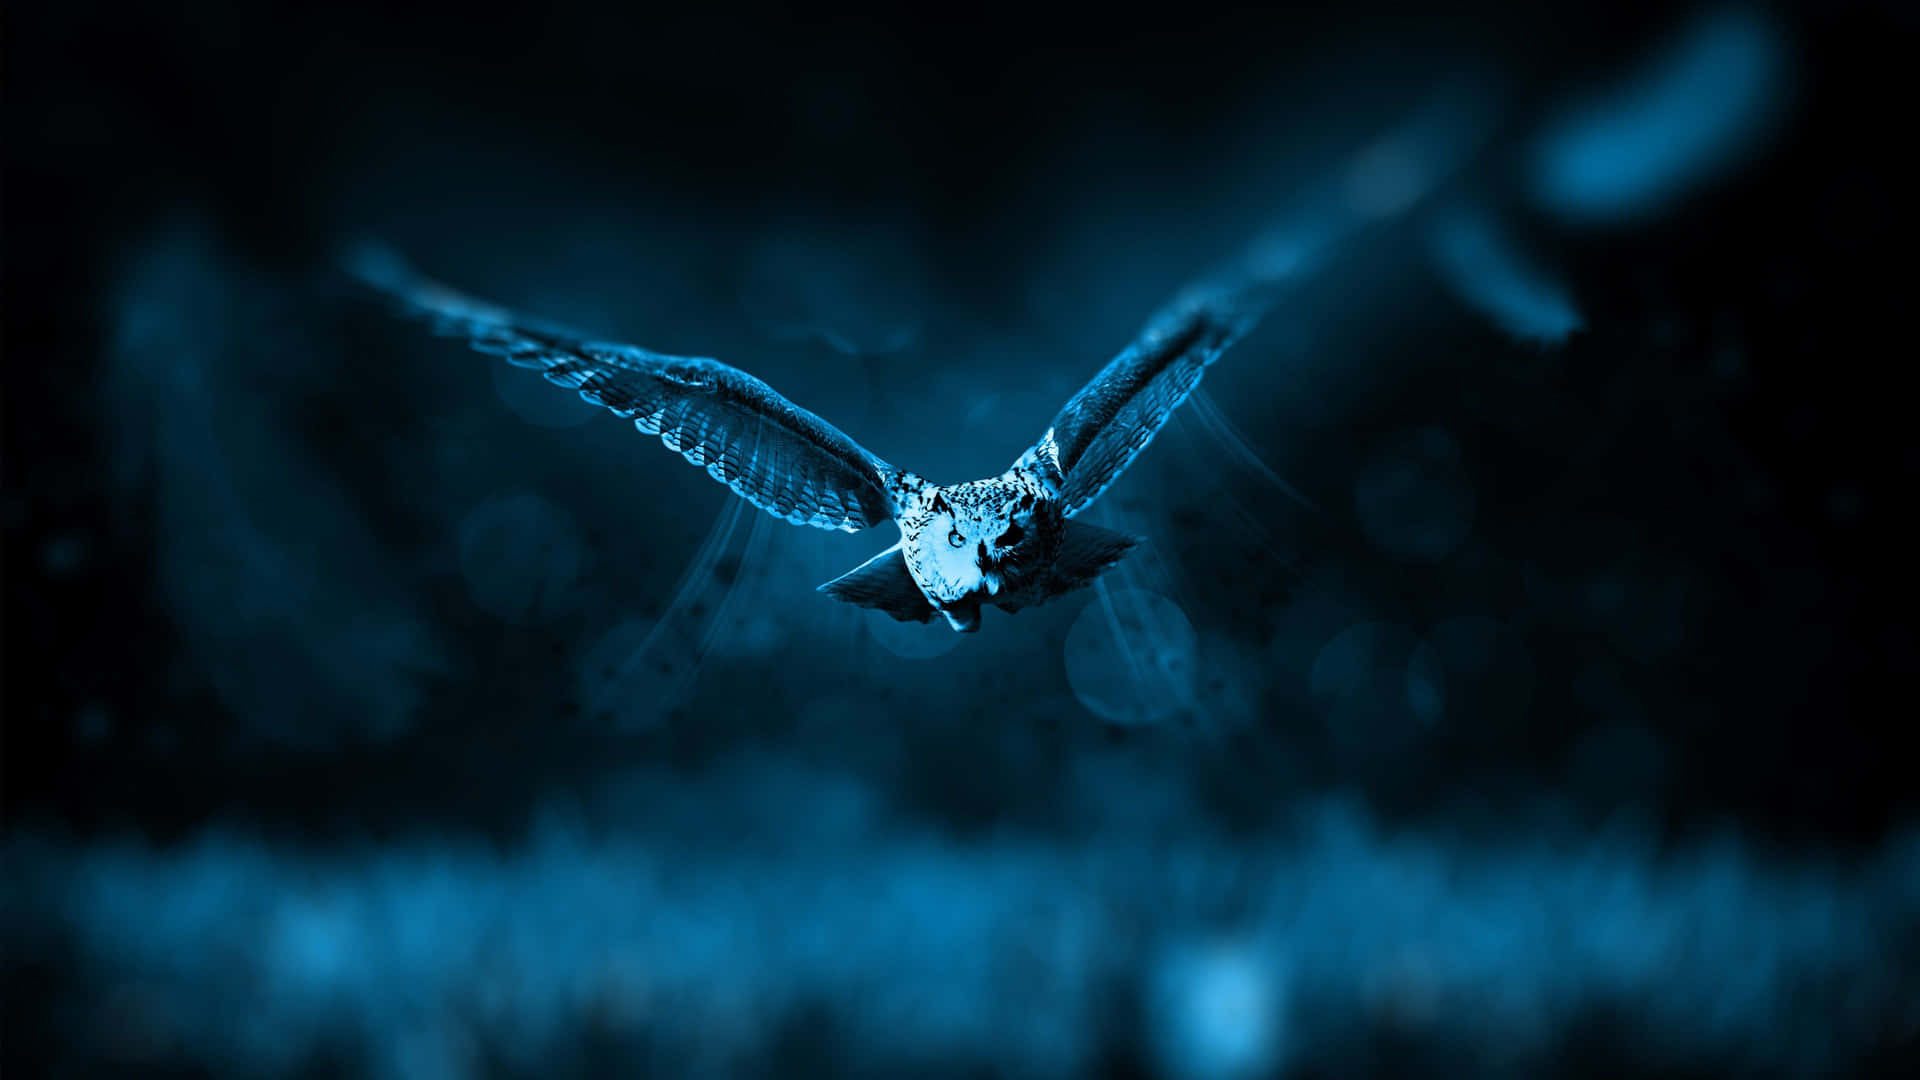 A Blue Owl Flying In The Sky